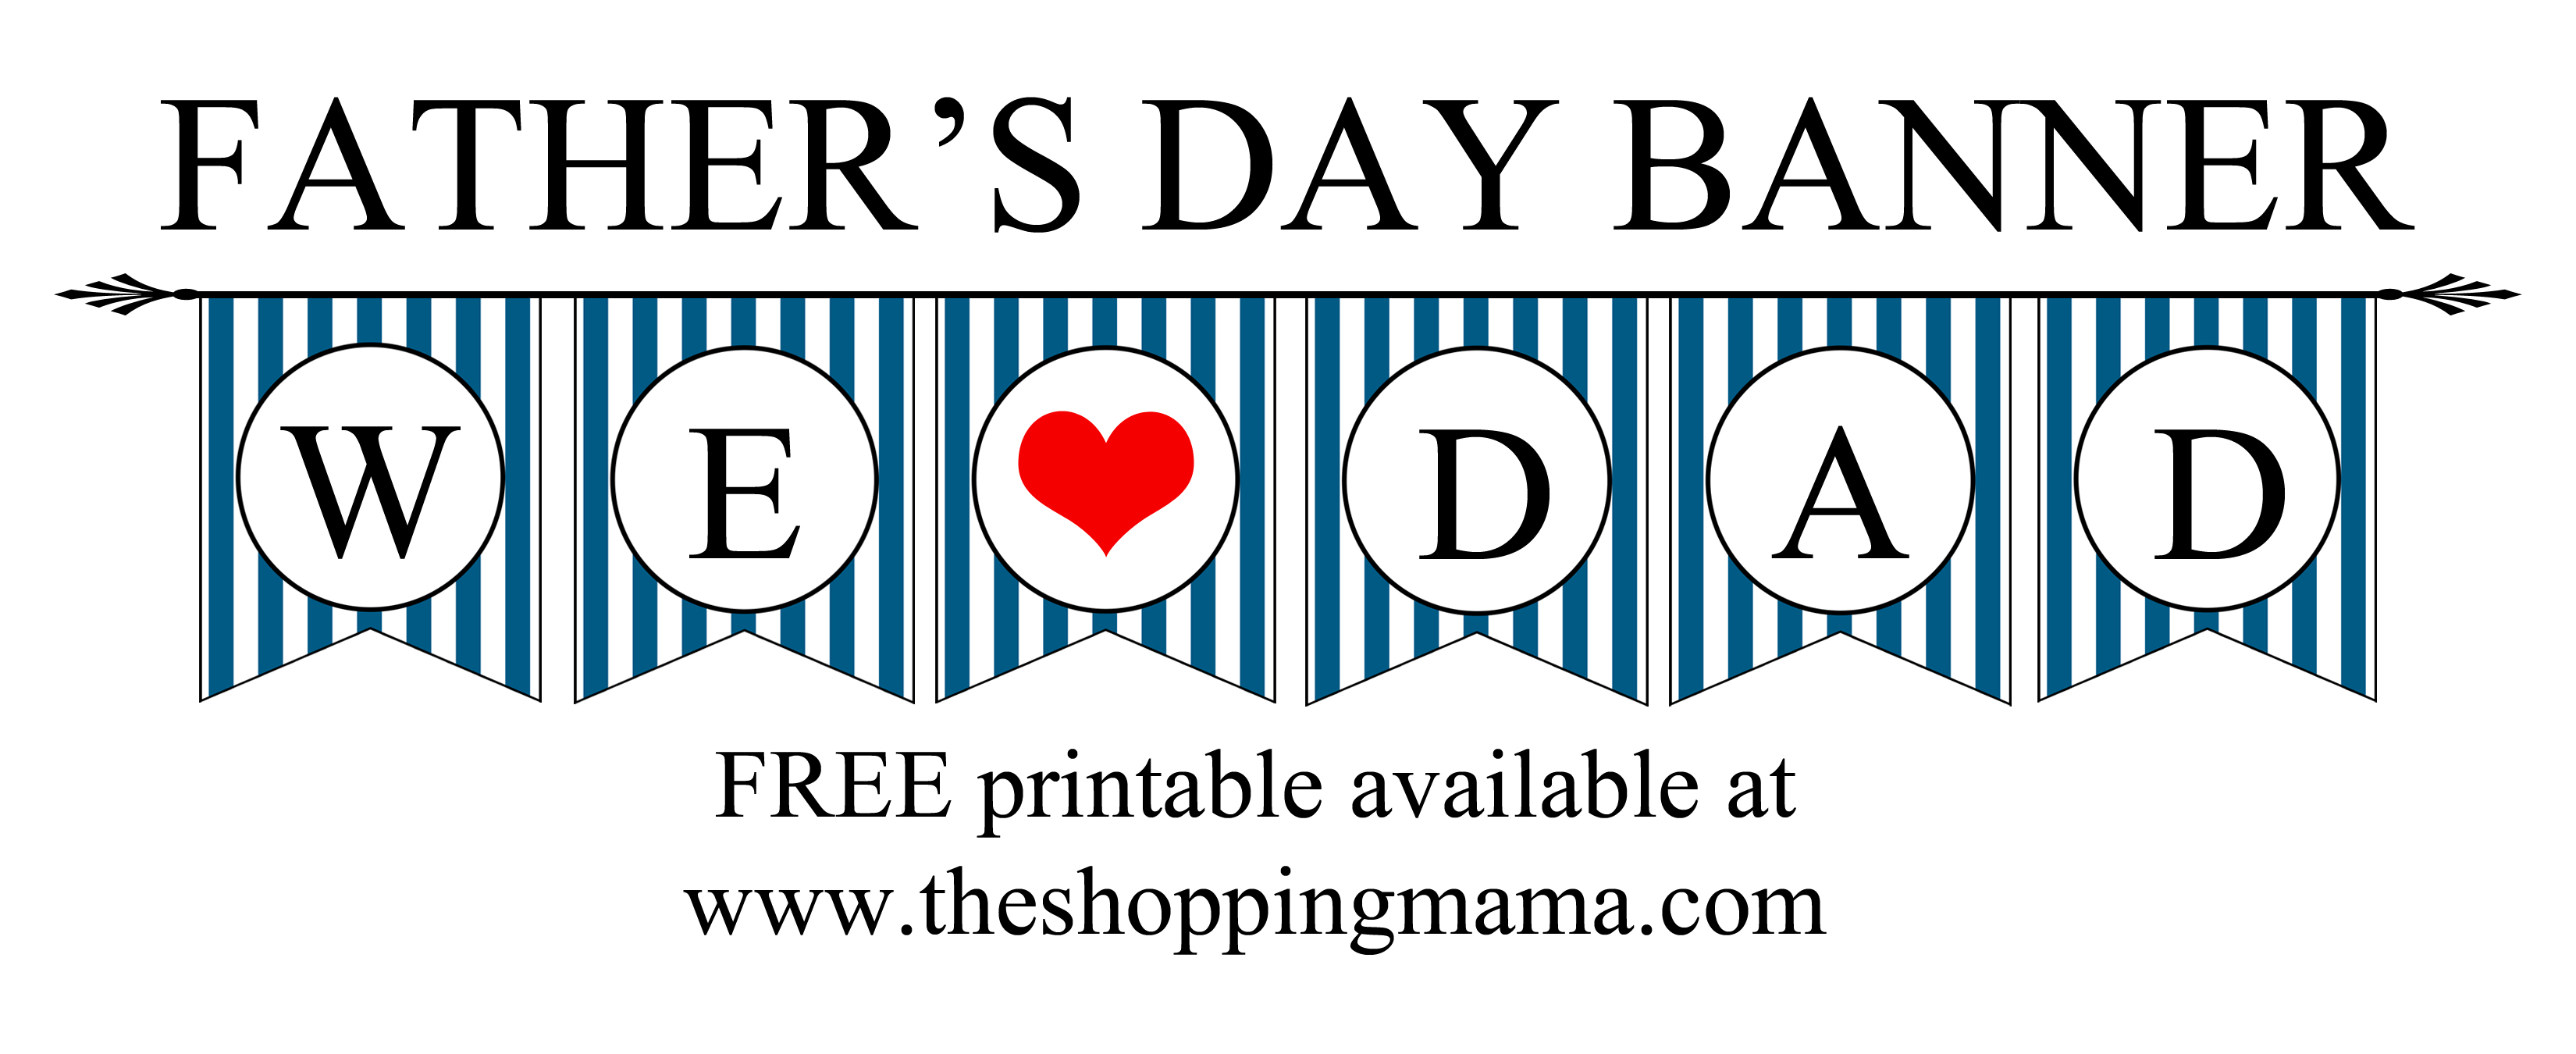 Happy Fathers Day Banner Free Printable Pdf Printable Templates